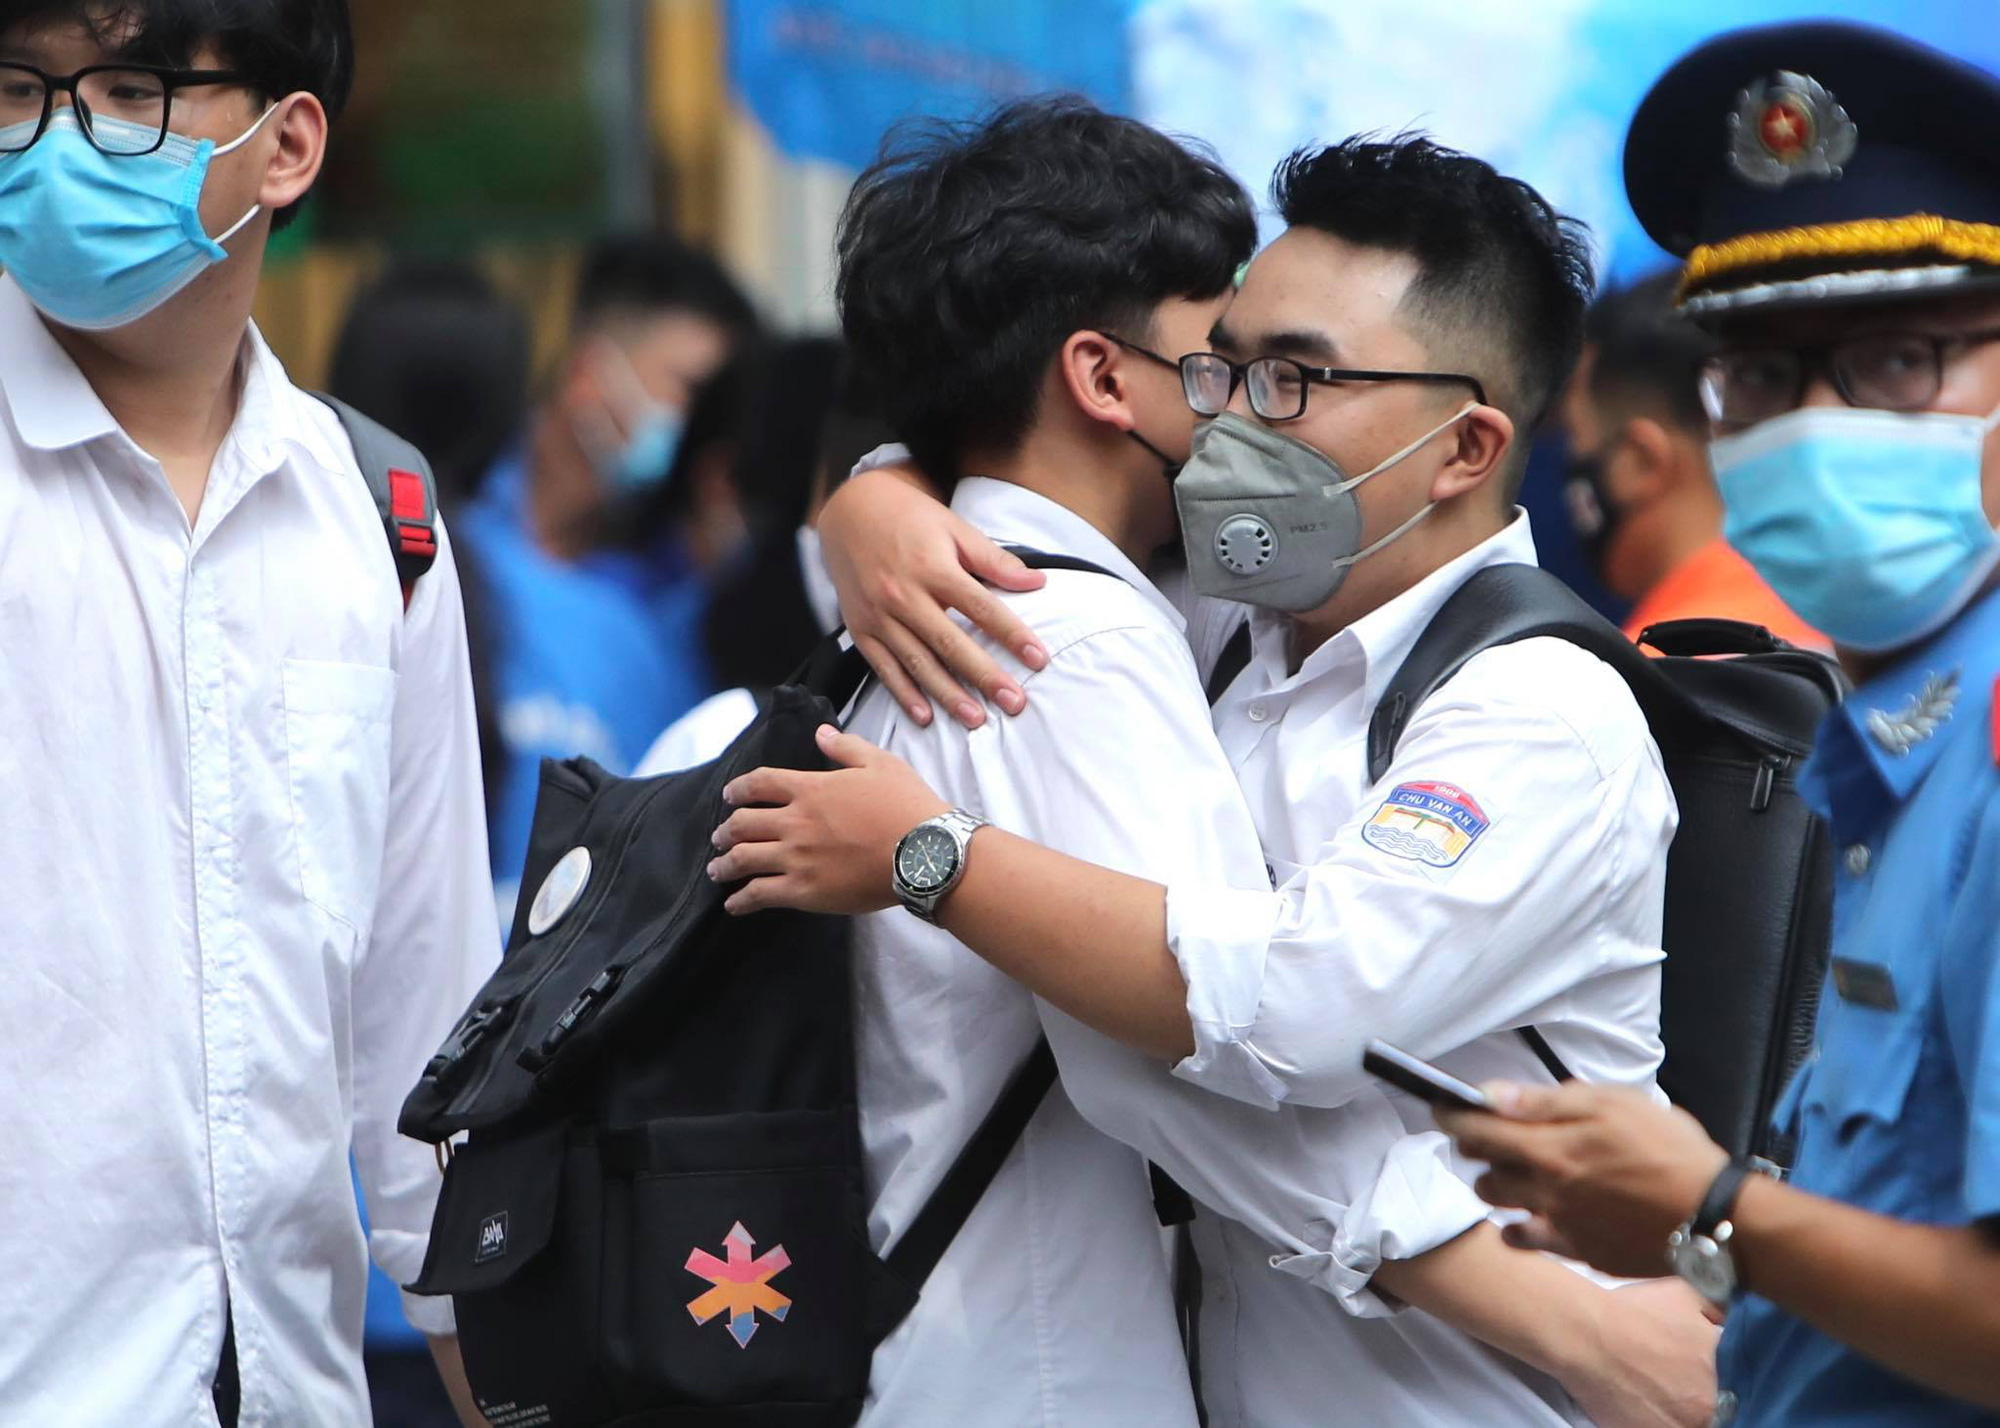 Two students hug each other after completing their literature test within the national high school exam in Hanoi, August 9, 2020. Photo: Nguyen Khanh / Tuoi Tre